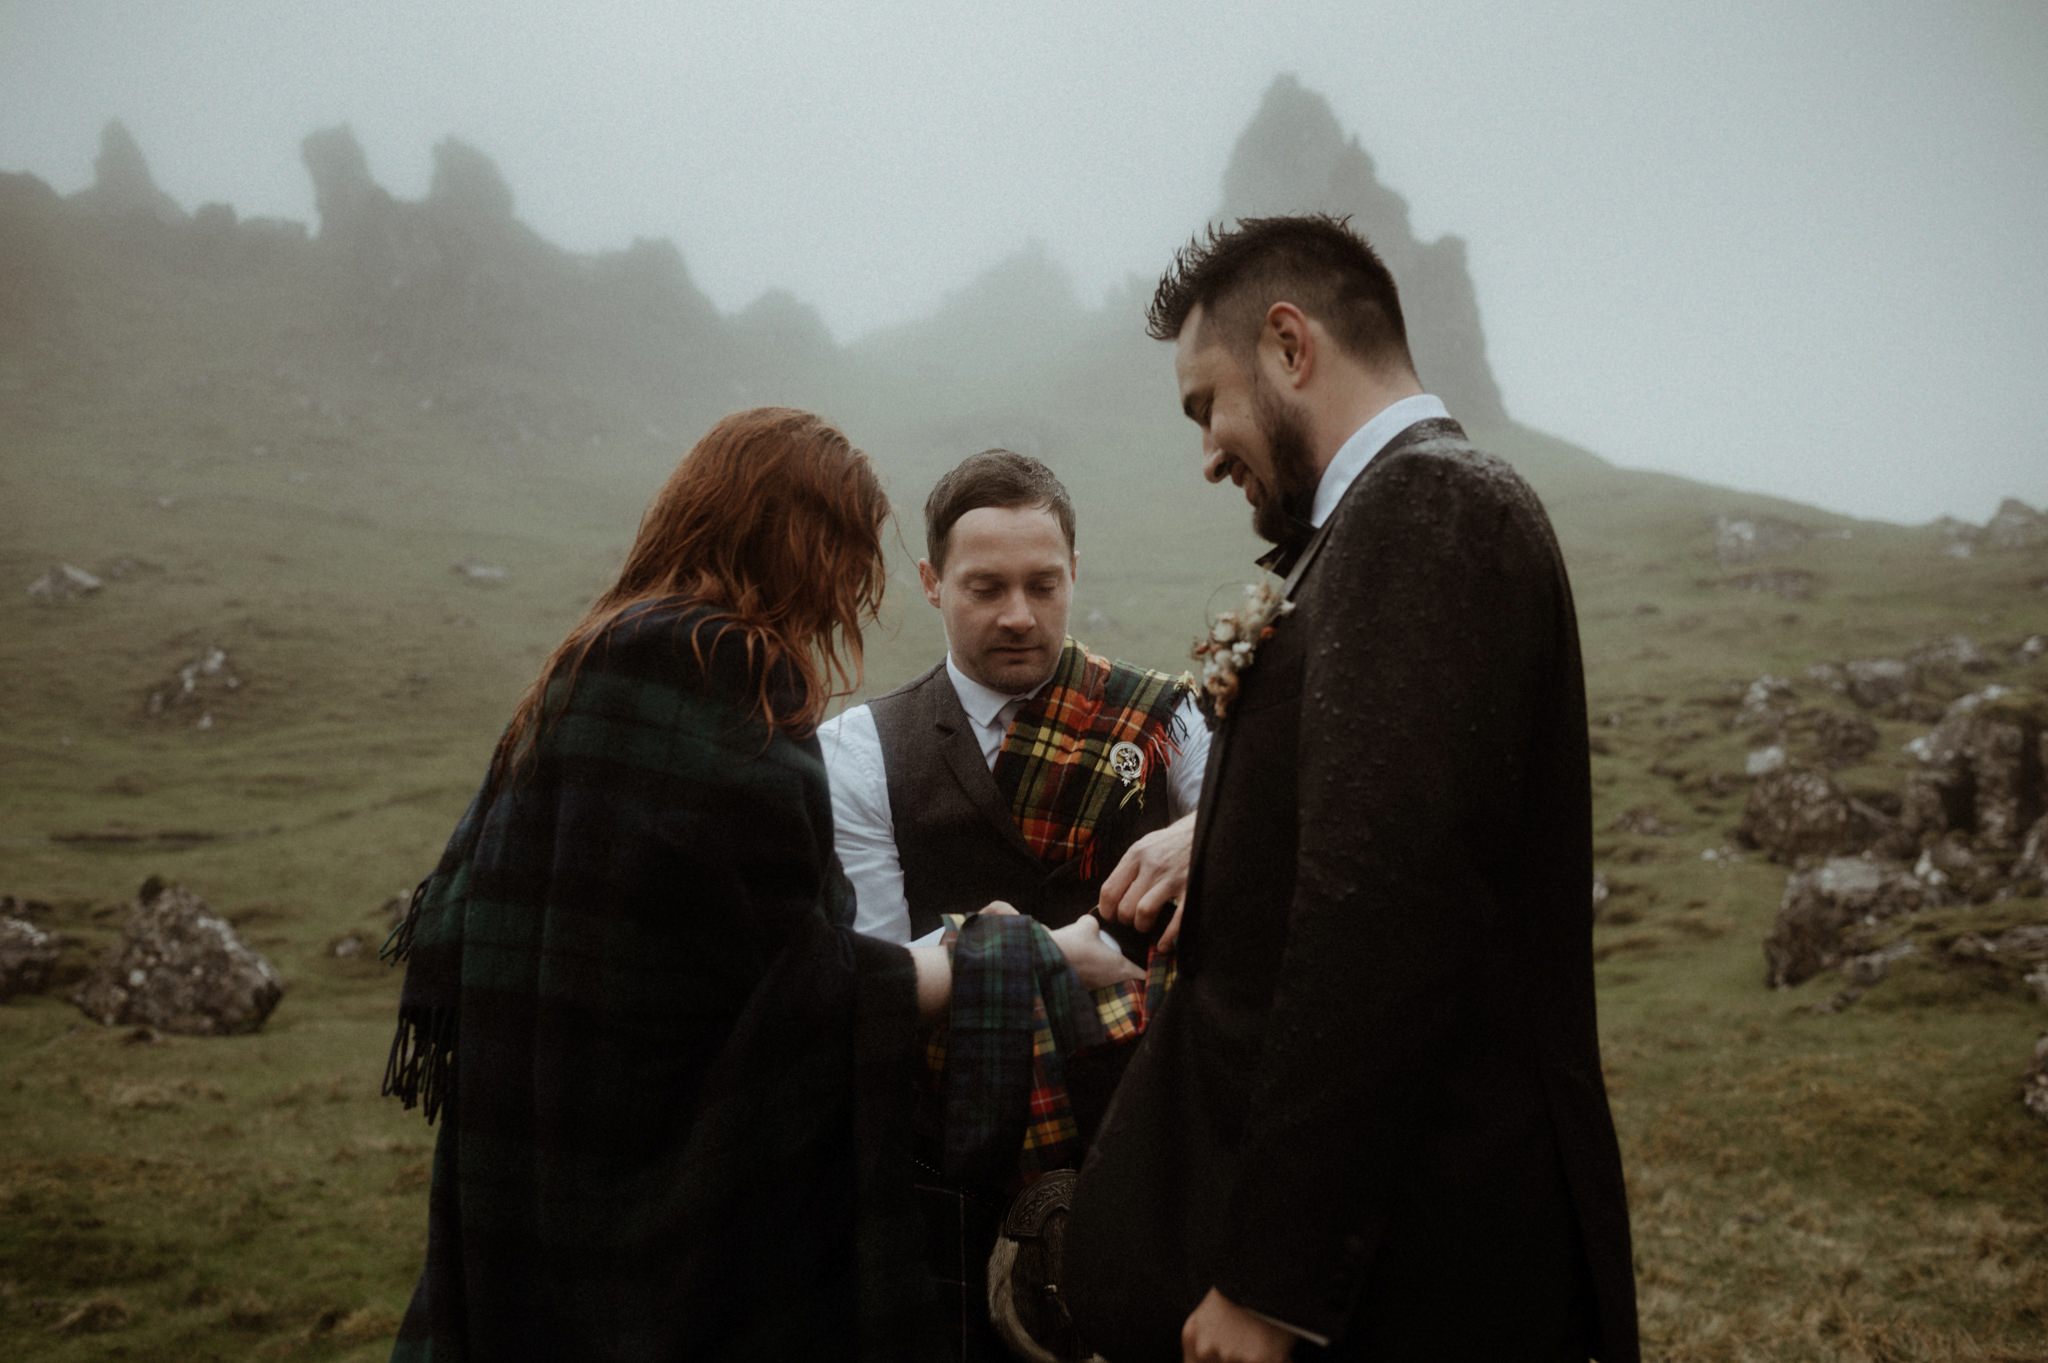 A traditional Scottish hand-fasting taking place during a wedding in Scotland outdoors in the rain with Bride and groom holding tartan ribbon near the Old man of Storr on Skye